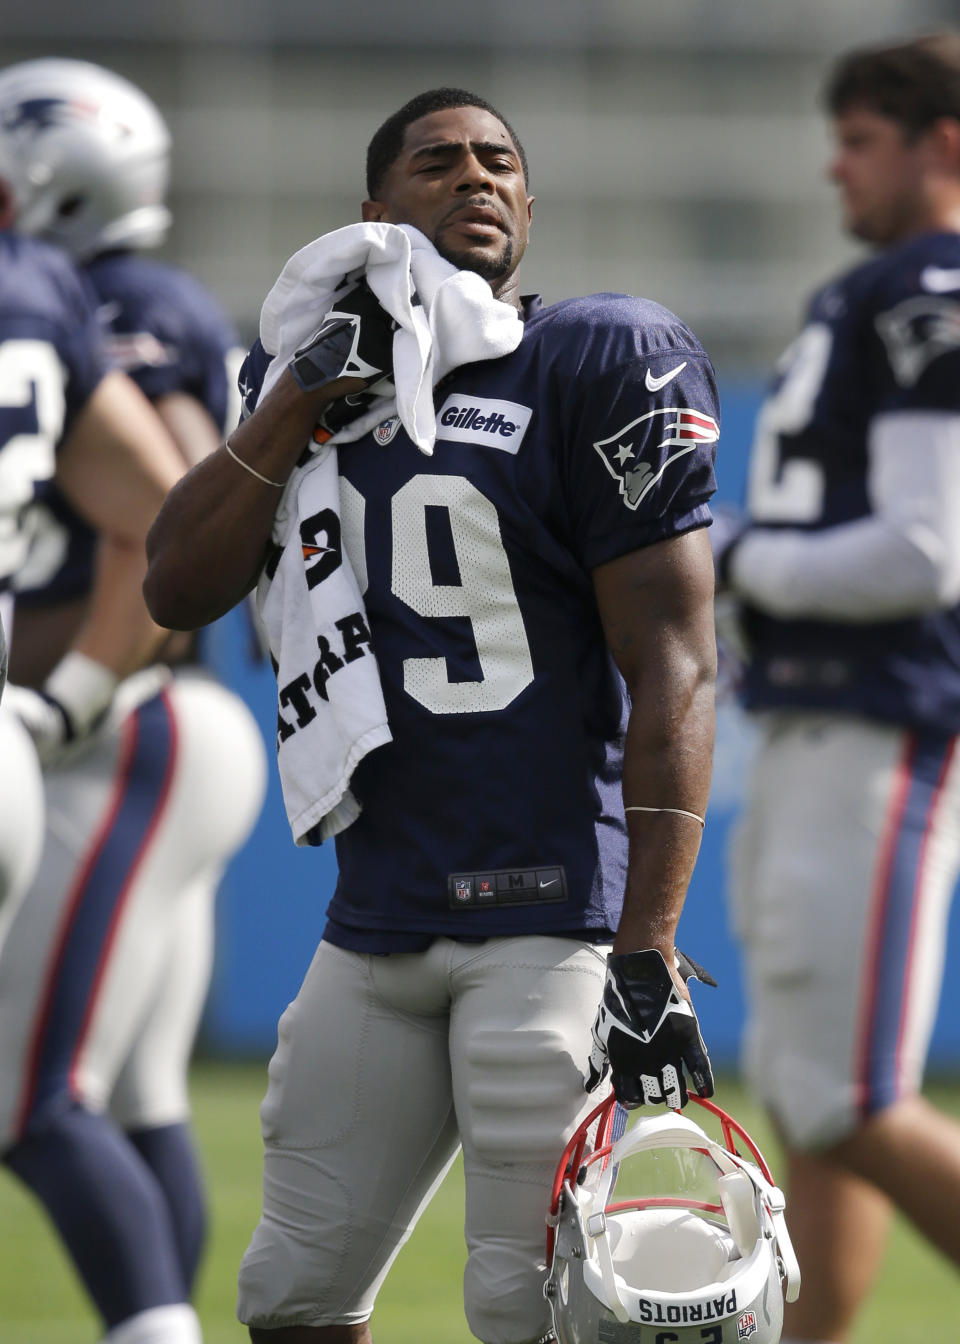 FILE - New England Patriots defensive back Malcolm Butler wipes his face with a towel during an NFL football training camp practice at Gillette Stadium, Sunday, July 27, 2014, in Foxborough, Mass. Butler was an "invited tryout" player who got his chance in May of that year. The coronavirus pandemic scuttled most college pro days, wiped out all rookie minicamps and obliterated the NFL's traditional offseason, making it became almost impossible for long shots to make their mark and, consequently, the 53-man roster. (AP Photo/Steven Senne, File)